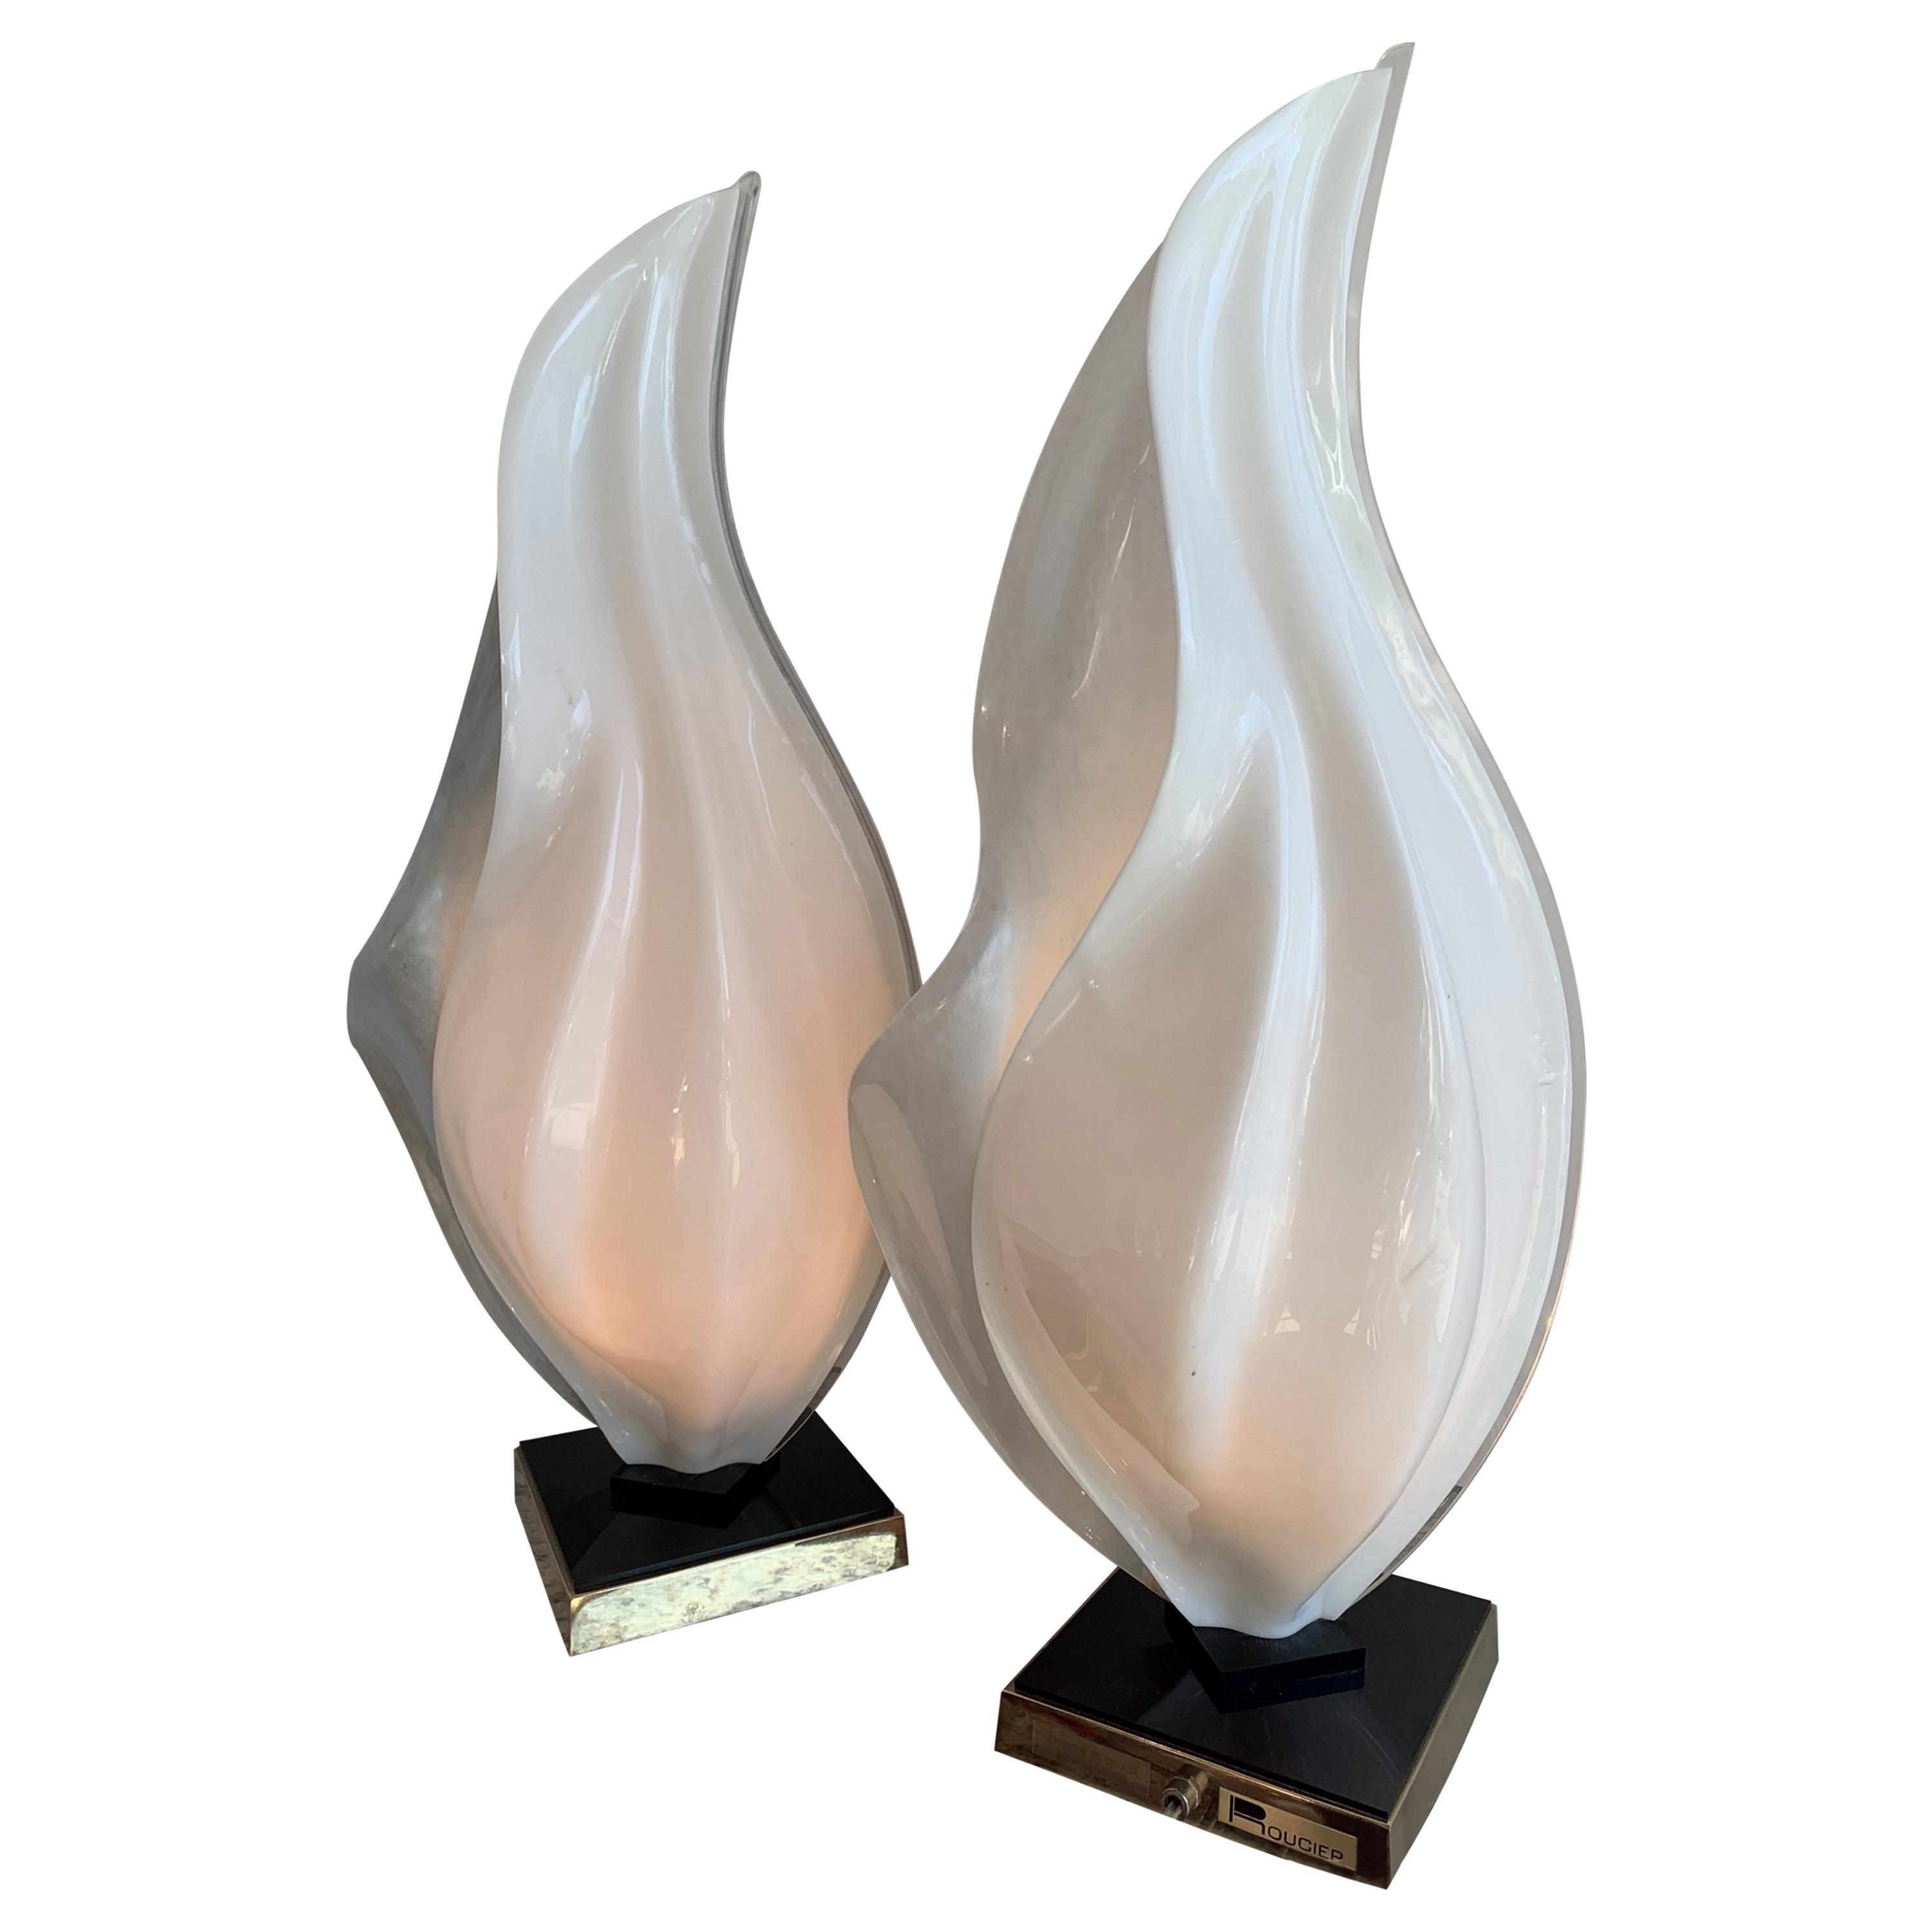 Pair of Mid-Century Modern Acrylic Tear Drop Table Lamps, by Rougier